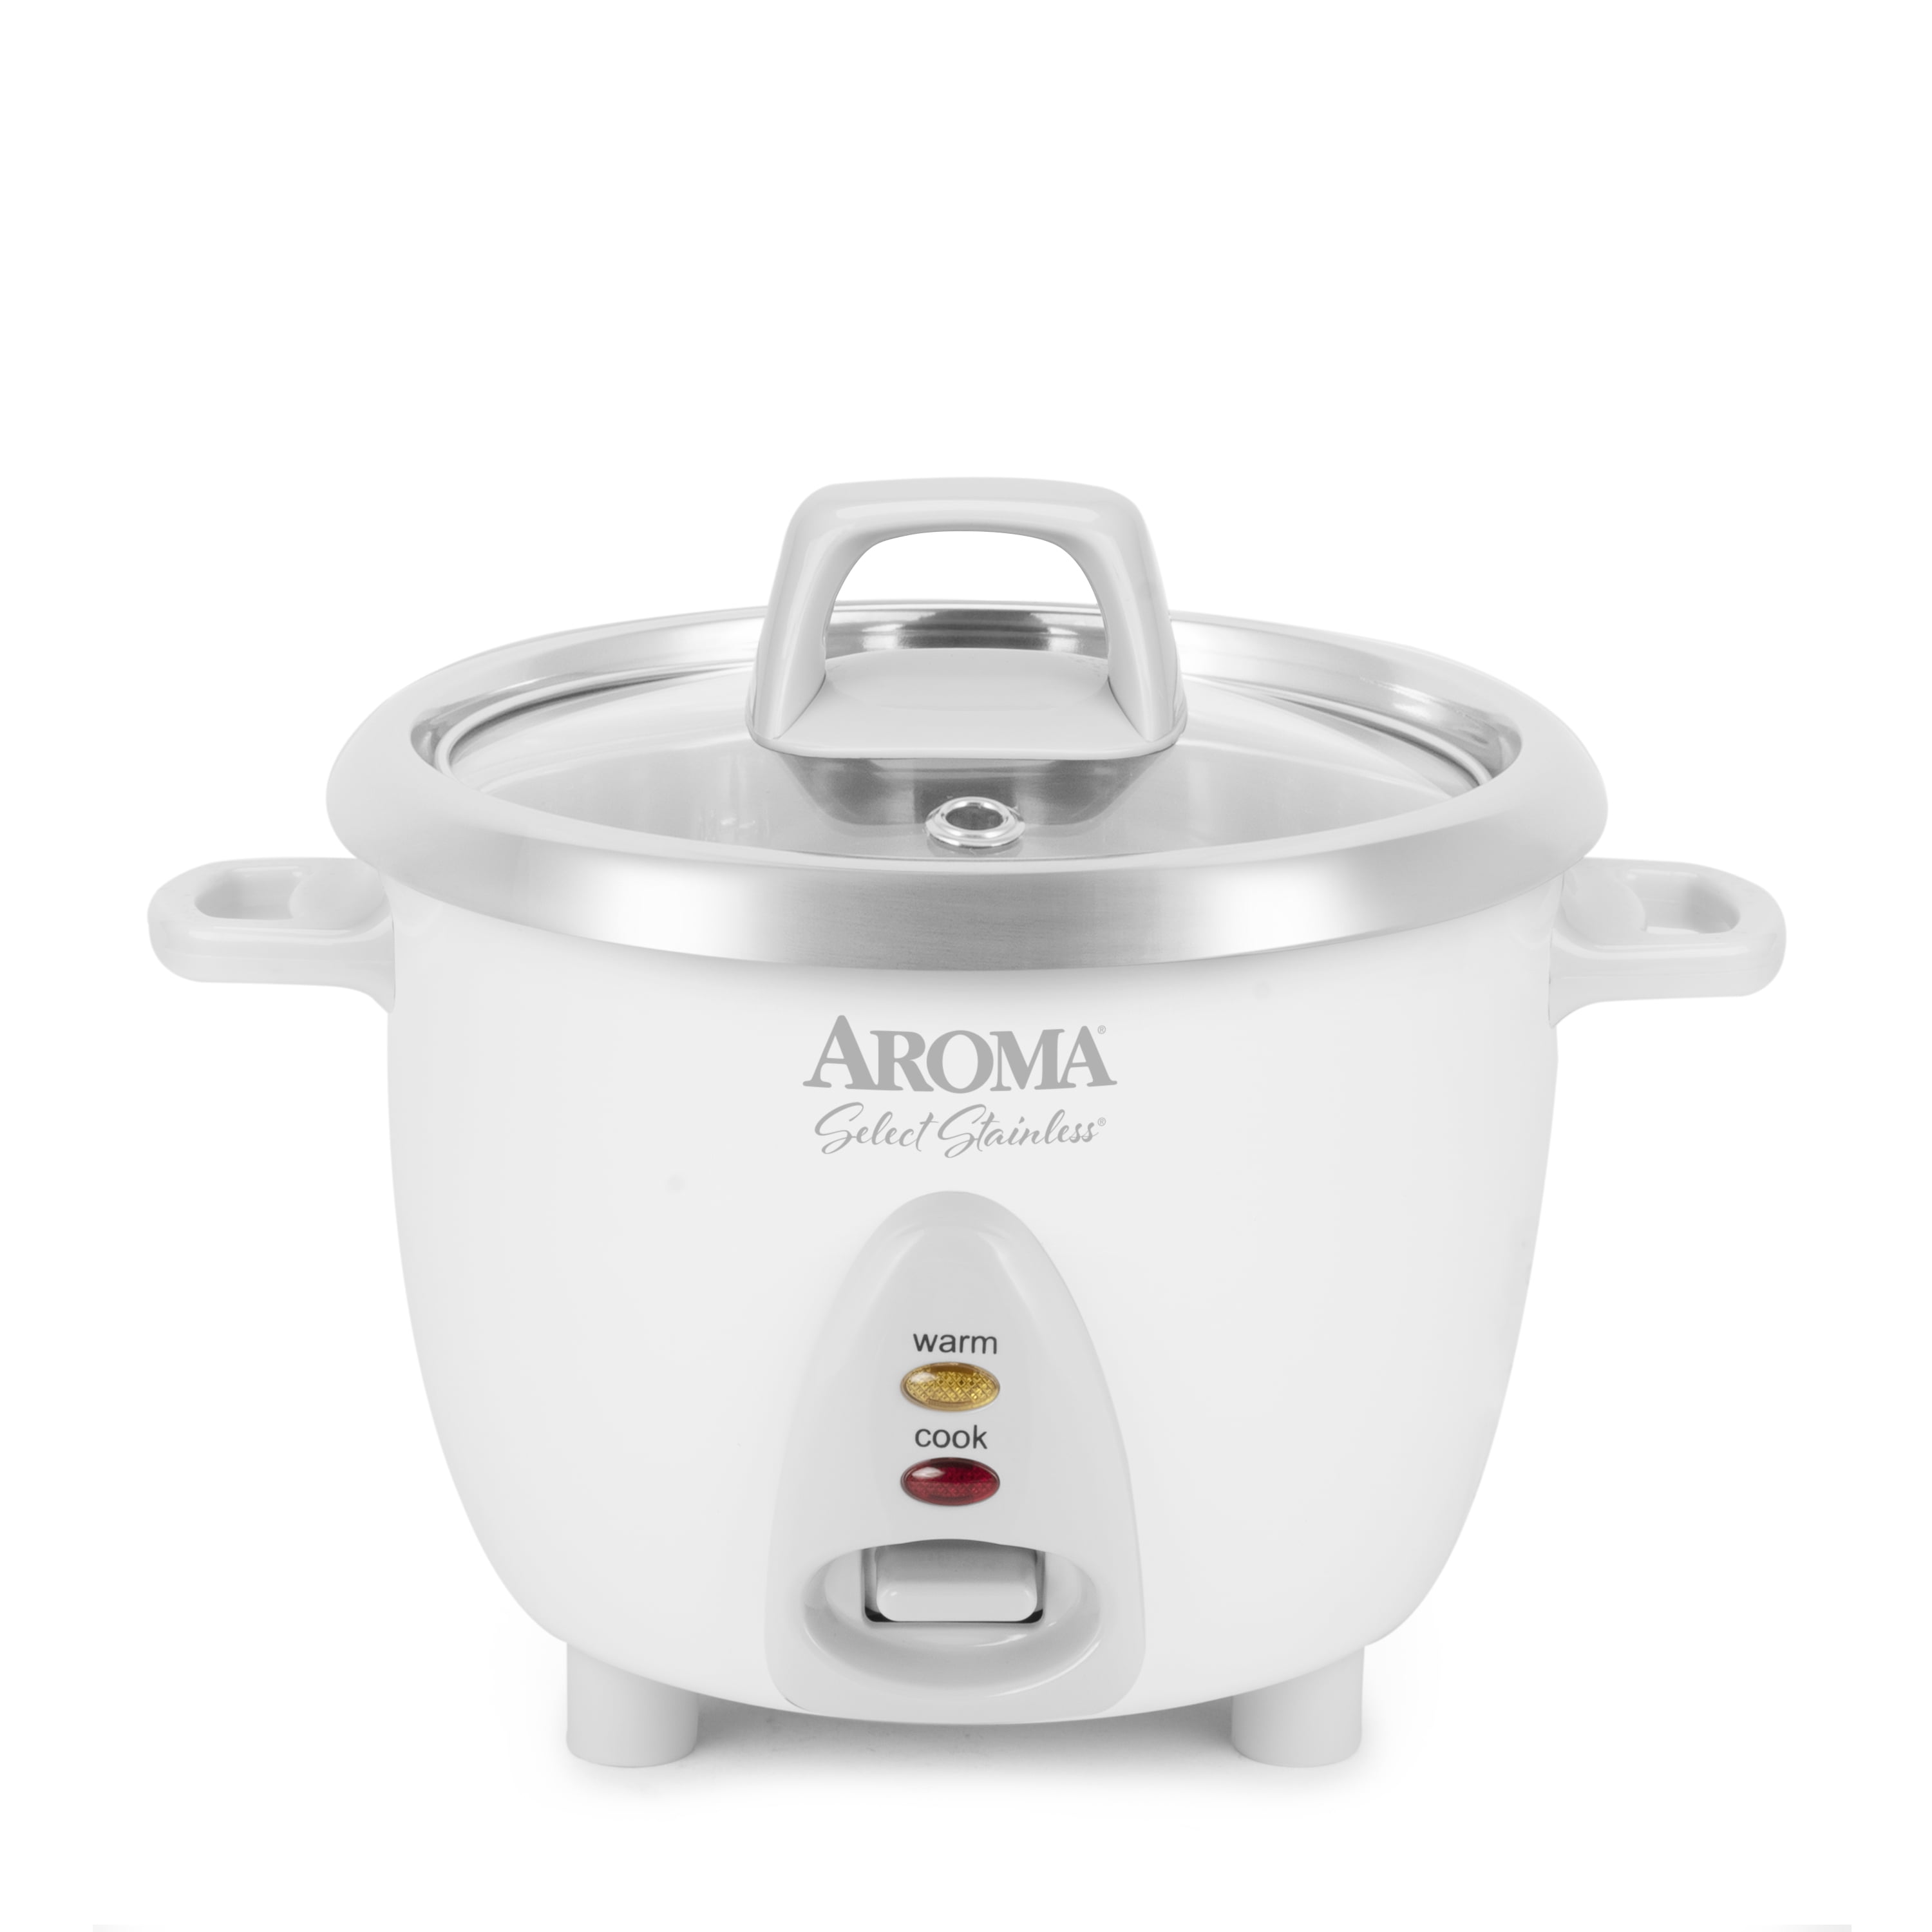 This Mini Rice Cooker Has Saved Me Time and Money by Being the Perfect Size  for Two